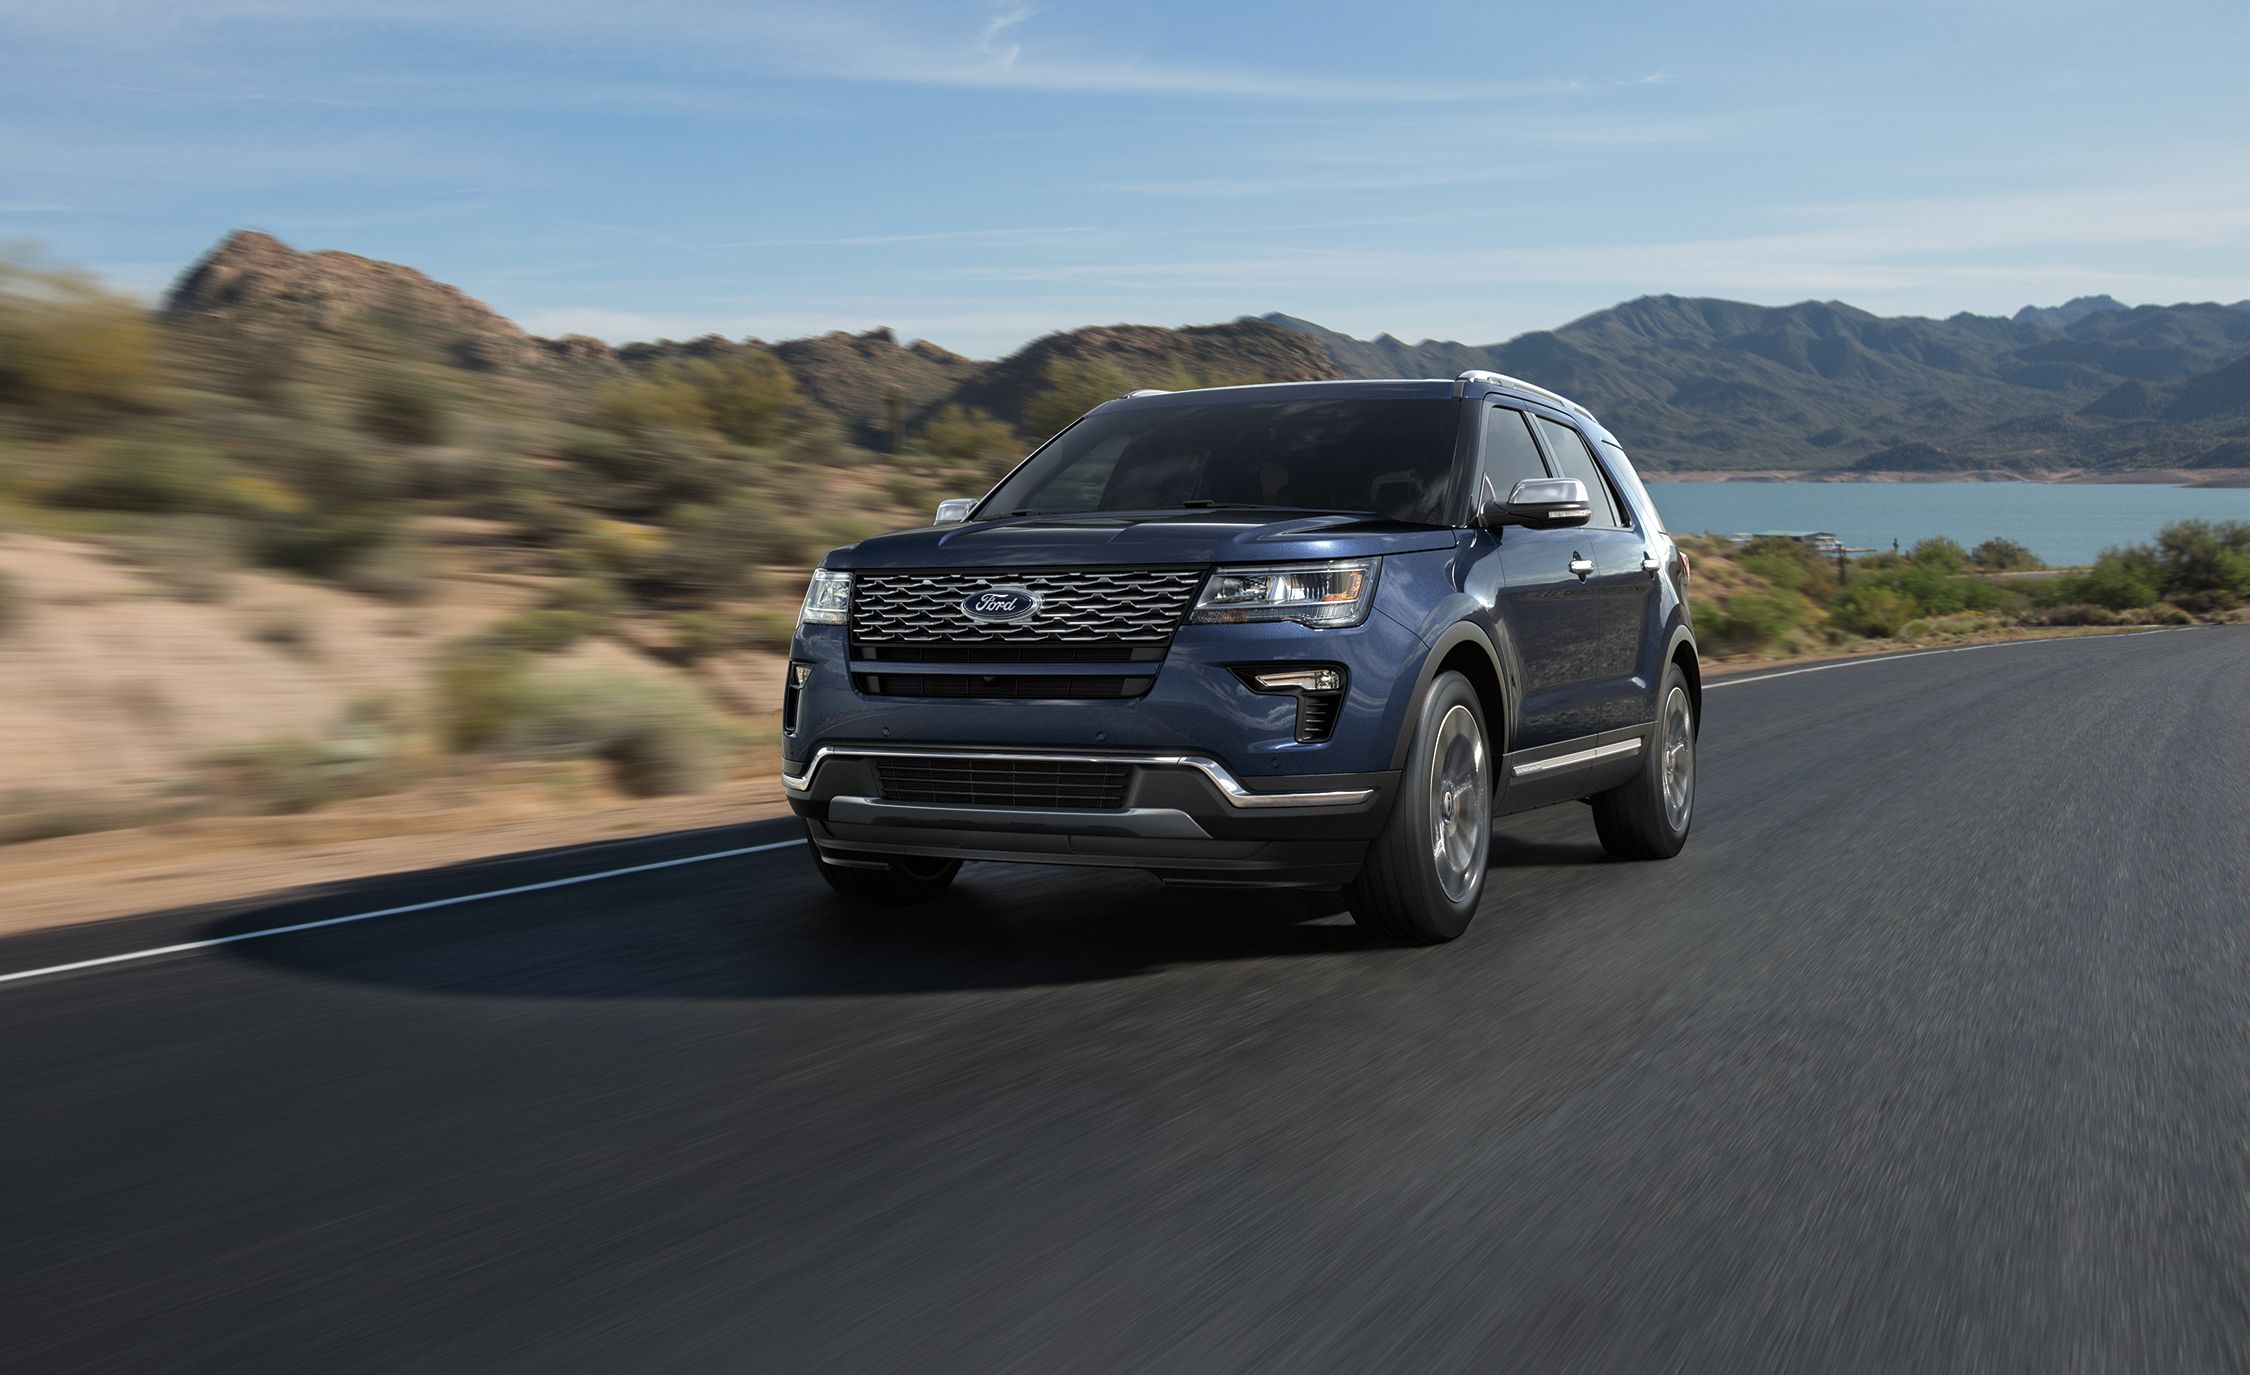 2018 Ford Explorer V facelift 2018 23 EcoBoost 280 Hp Automatic   Technical specs data fuel consumption Dimensions